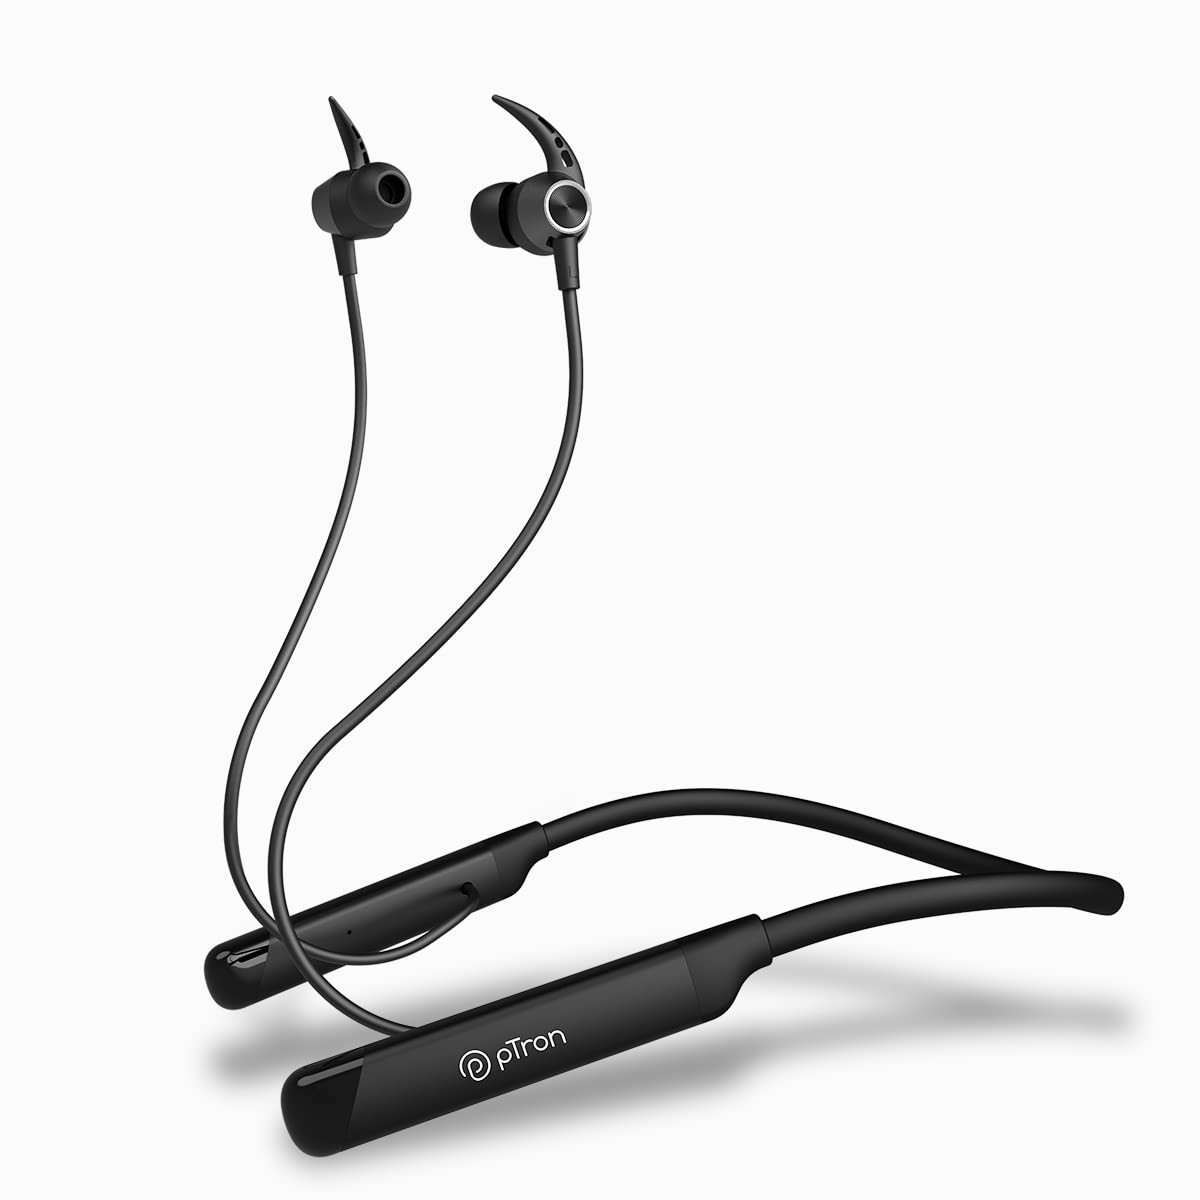 pTron Tangent Sports 60Hrs Playtime ENC Calls BT52 Headphone AptSense 40ms Low Latency Gaming HD Mic Dual Device Pairing in-Ear Wireless Earphone Type-C Fast Charging  Voice Assist Black